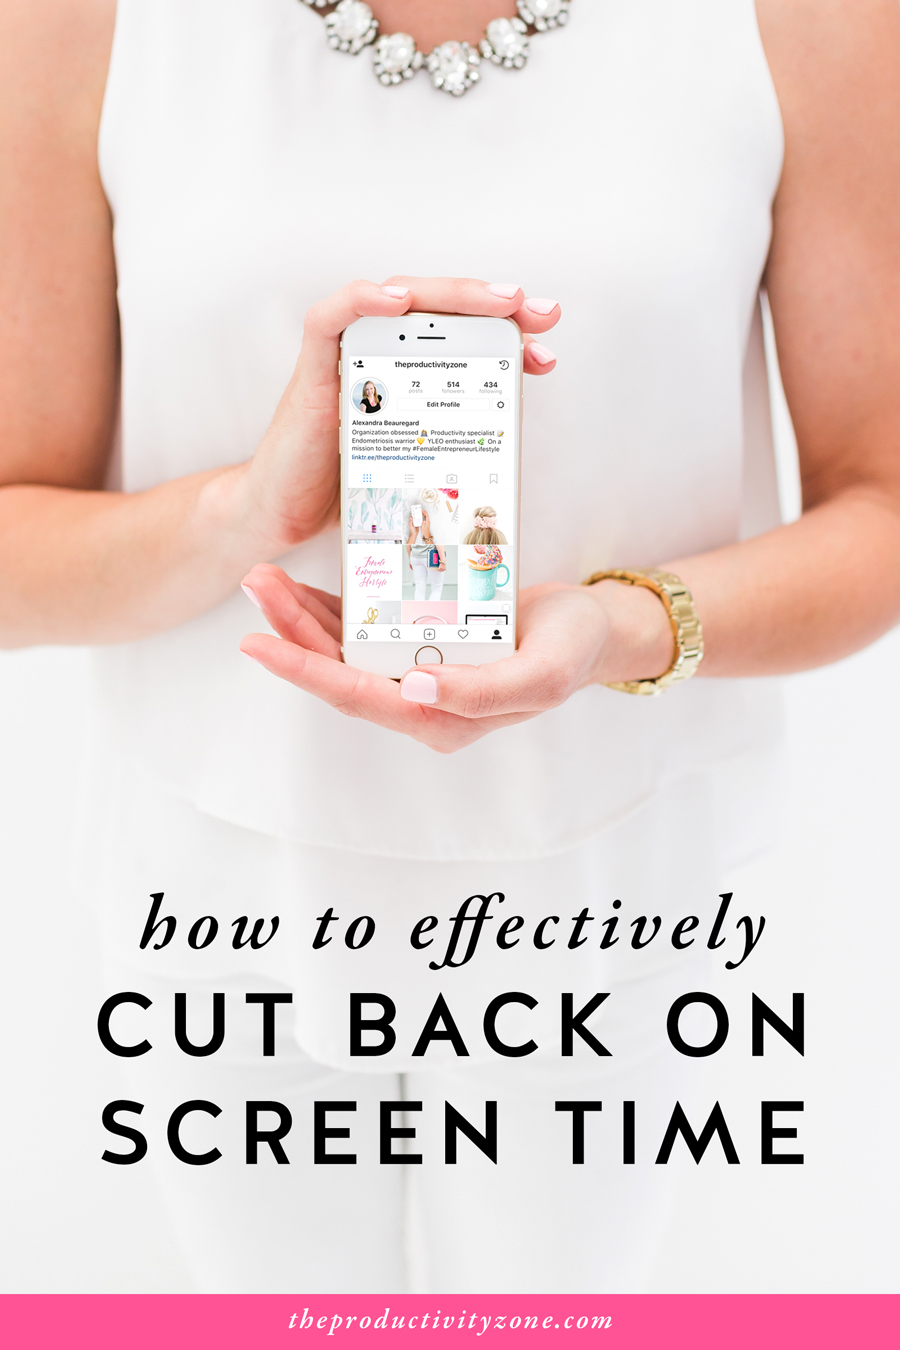 Addicted to technology? It’s time to instill healthier habits and better boundaries when it comes to technology (for yourself and your family). Over on The Productivity Zone, I’m sharing 6 of the most effective ways you can cut back on screen time starting today!!